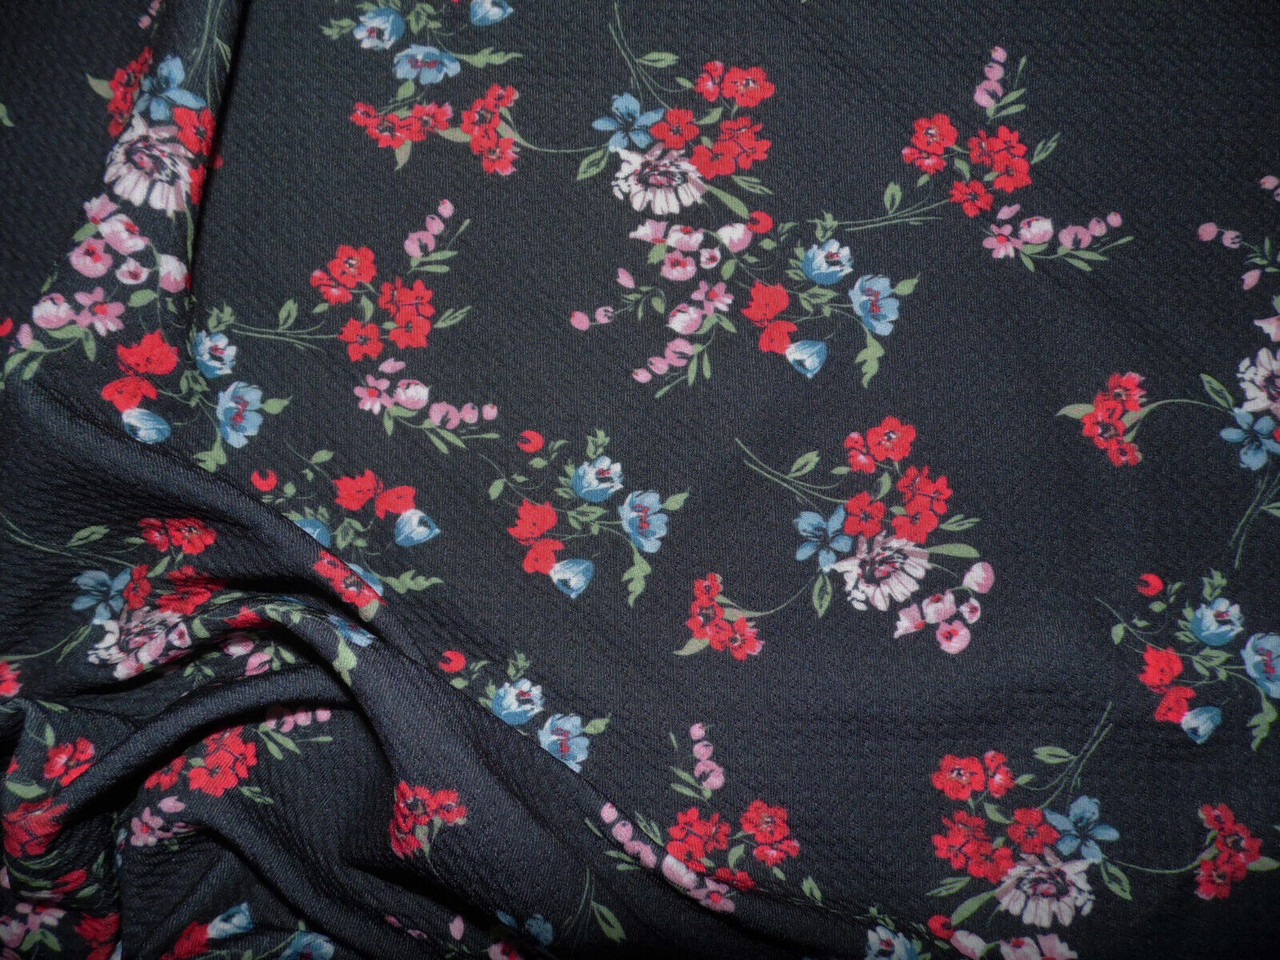 Bullet Printed Liverpool Textured Fabric Stretch Black Red Blue Green Floral O36